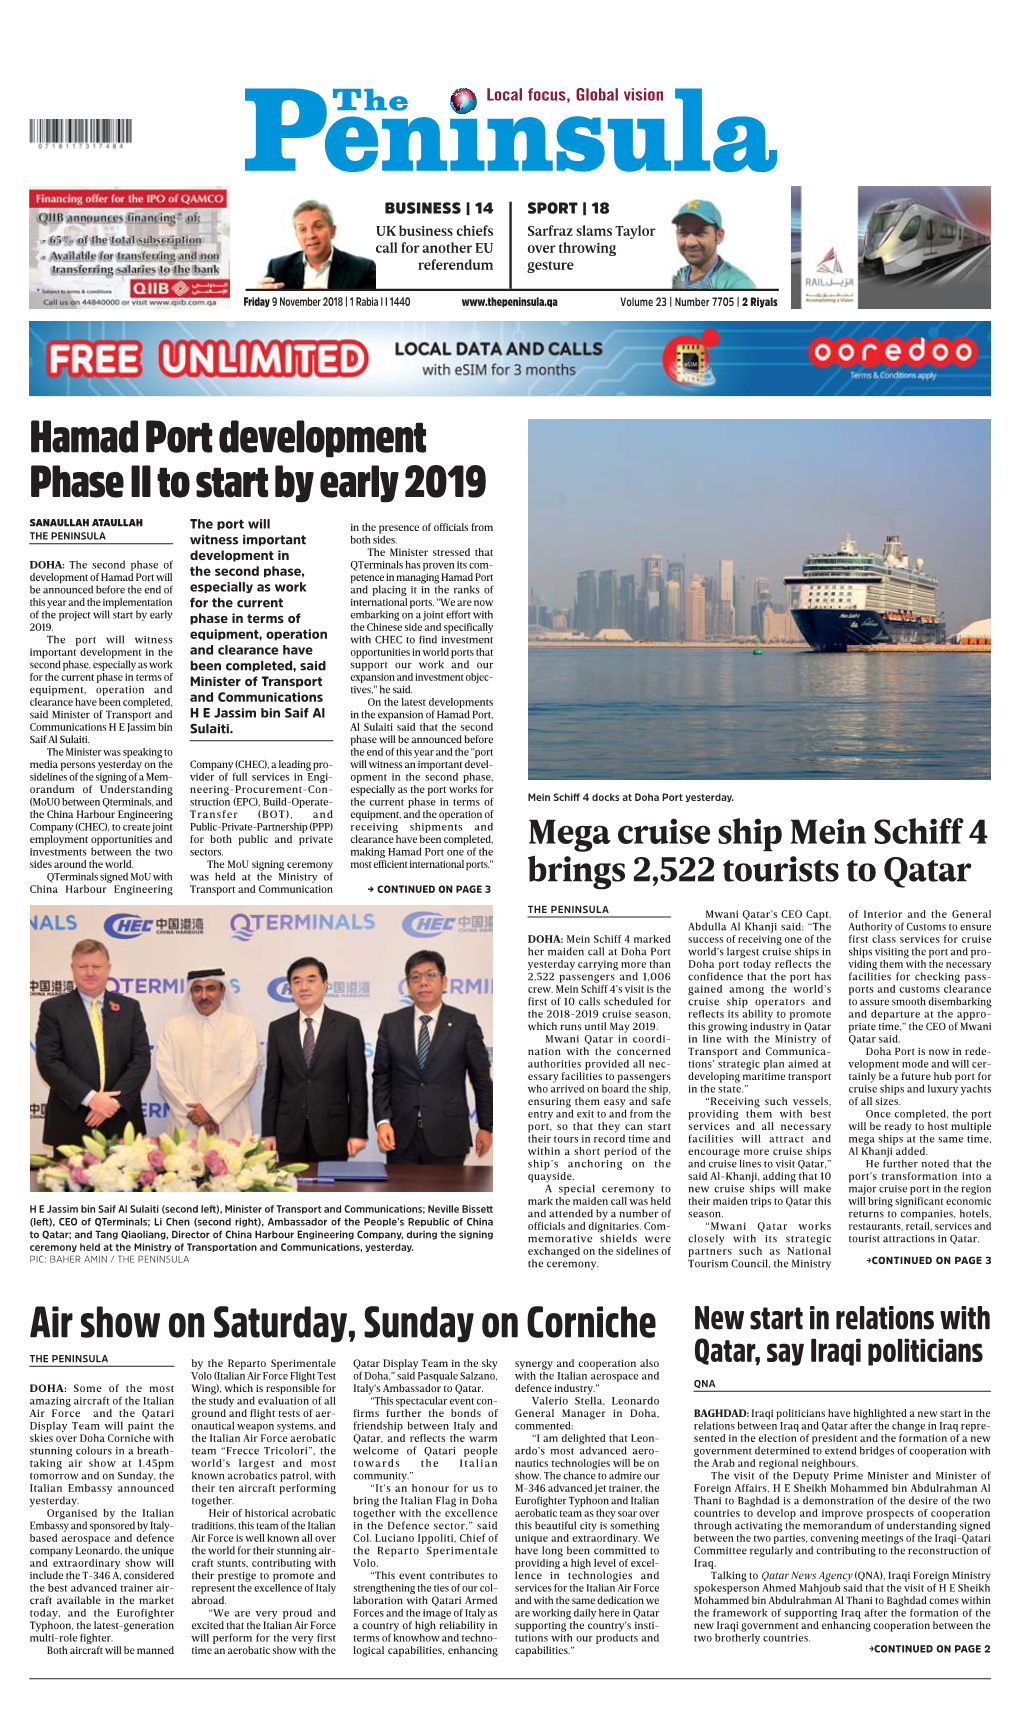 Hamad Port Development Phase II to Start by Early 2019